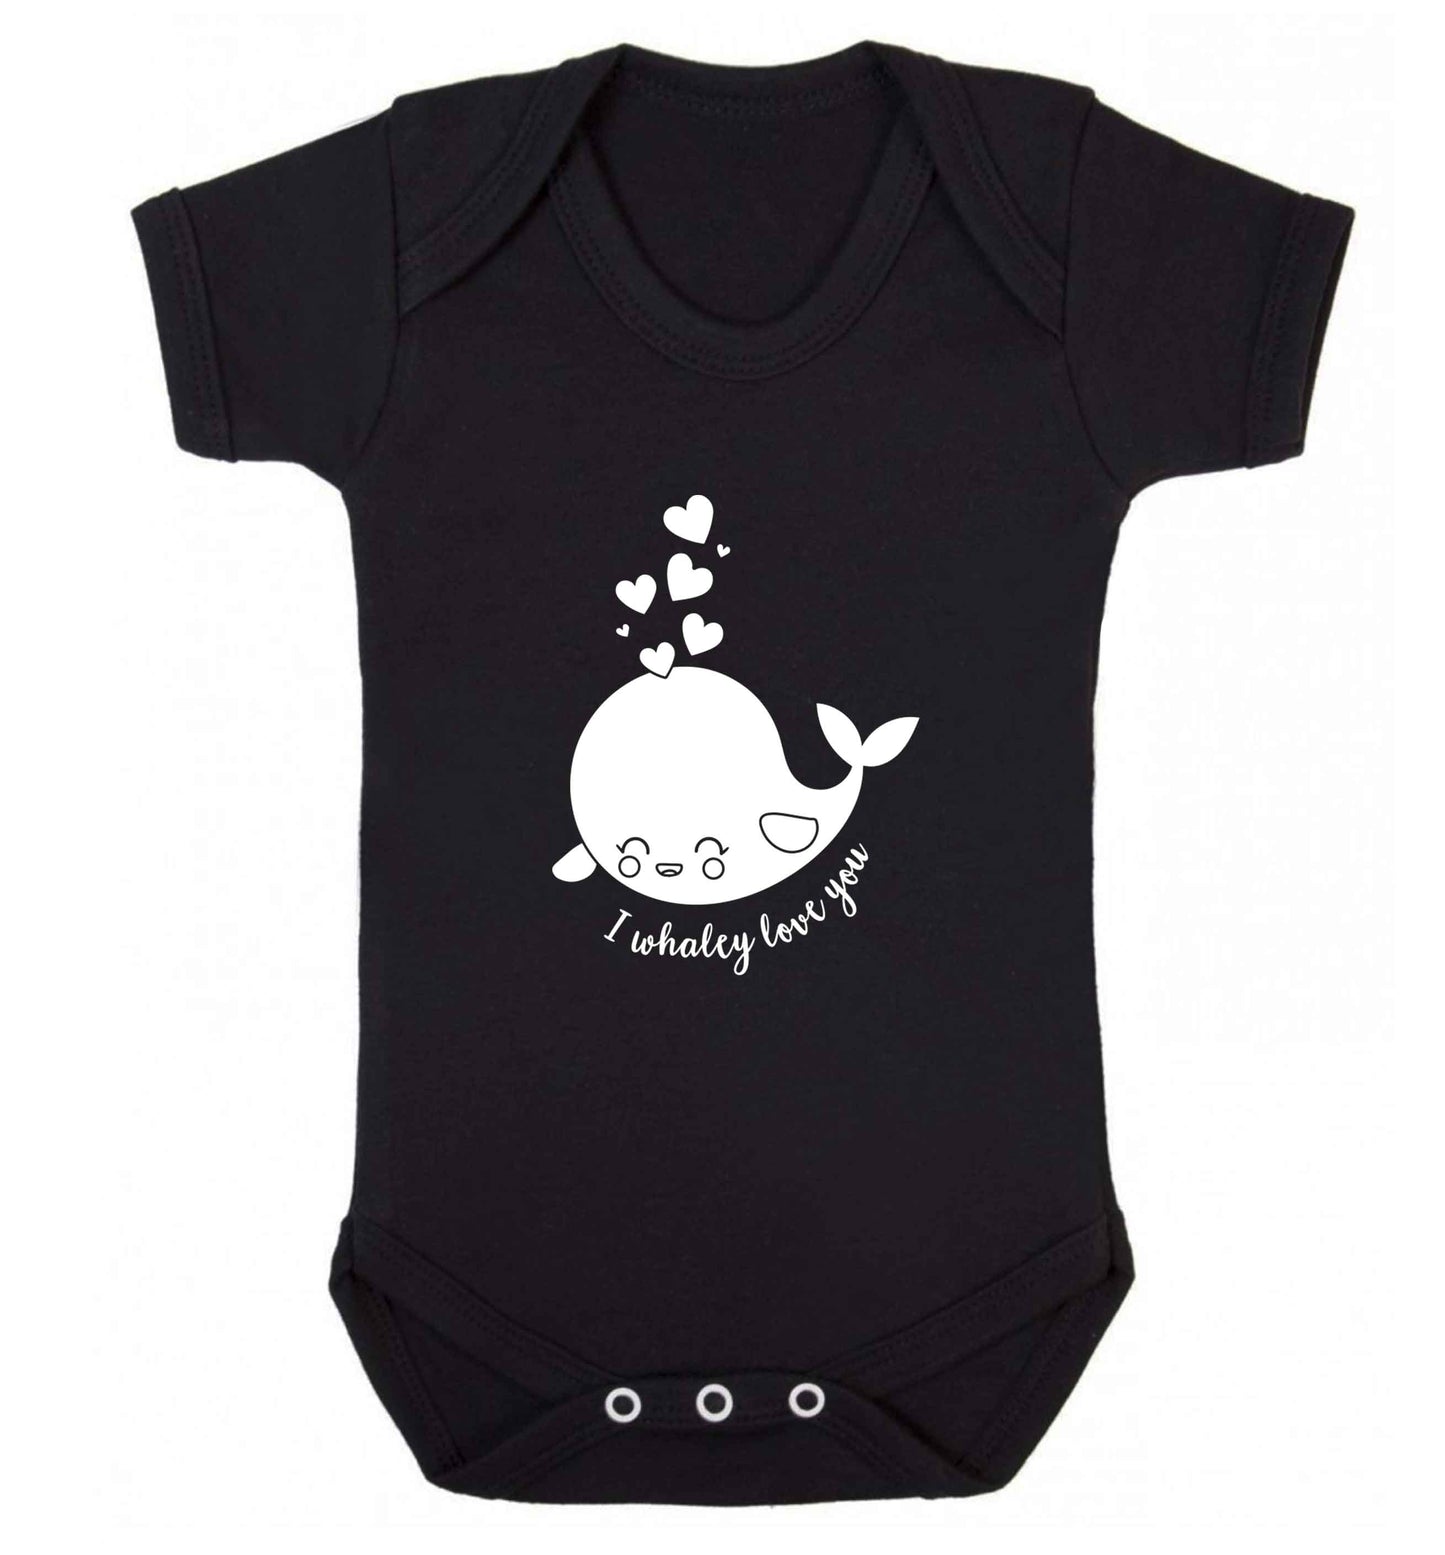 I whaley love you baby vest black 18-24 months